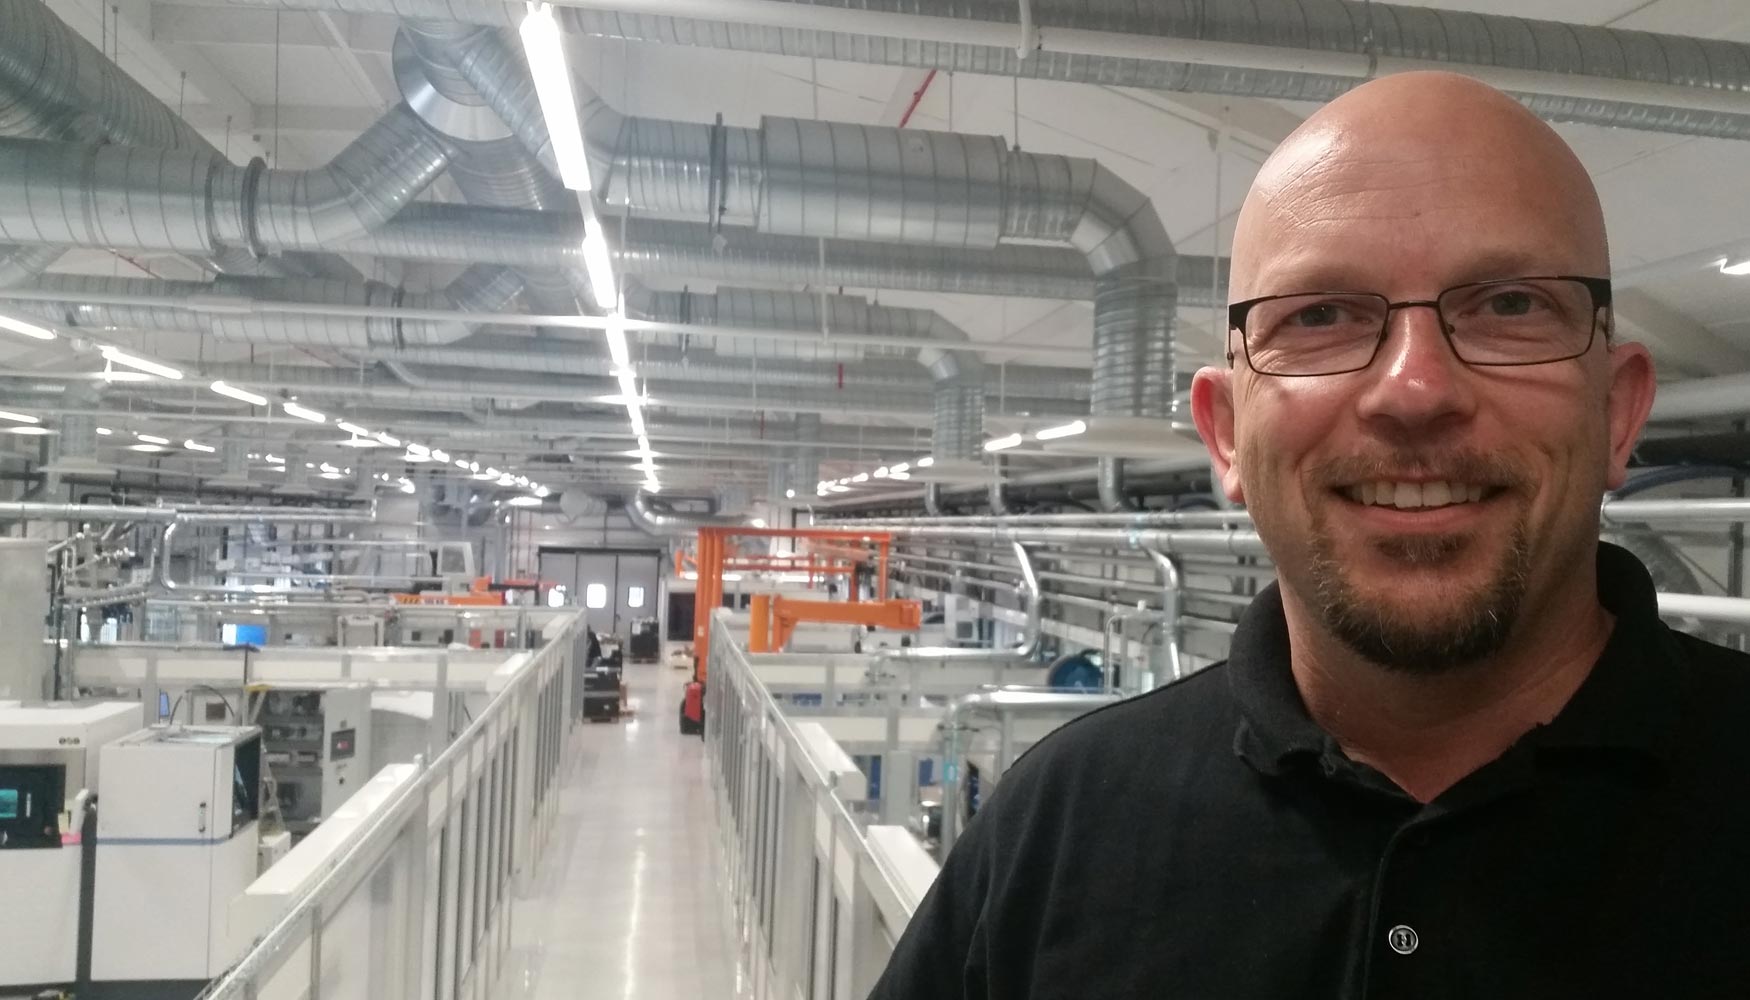 Andreas Graichen, Group Manager of Additive Manufacturing of Competence en Siemens Industrial Turbomachinery